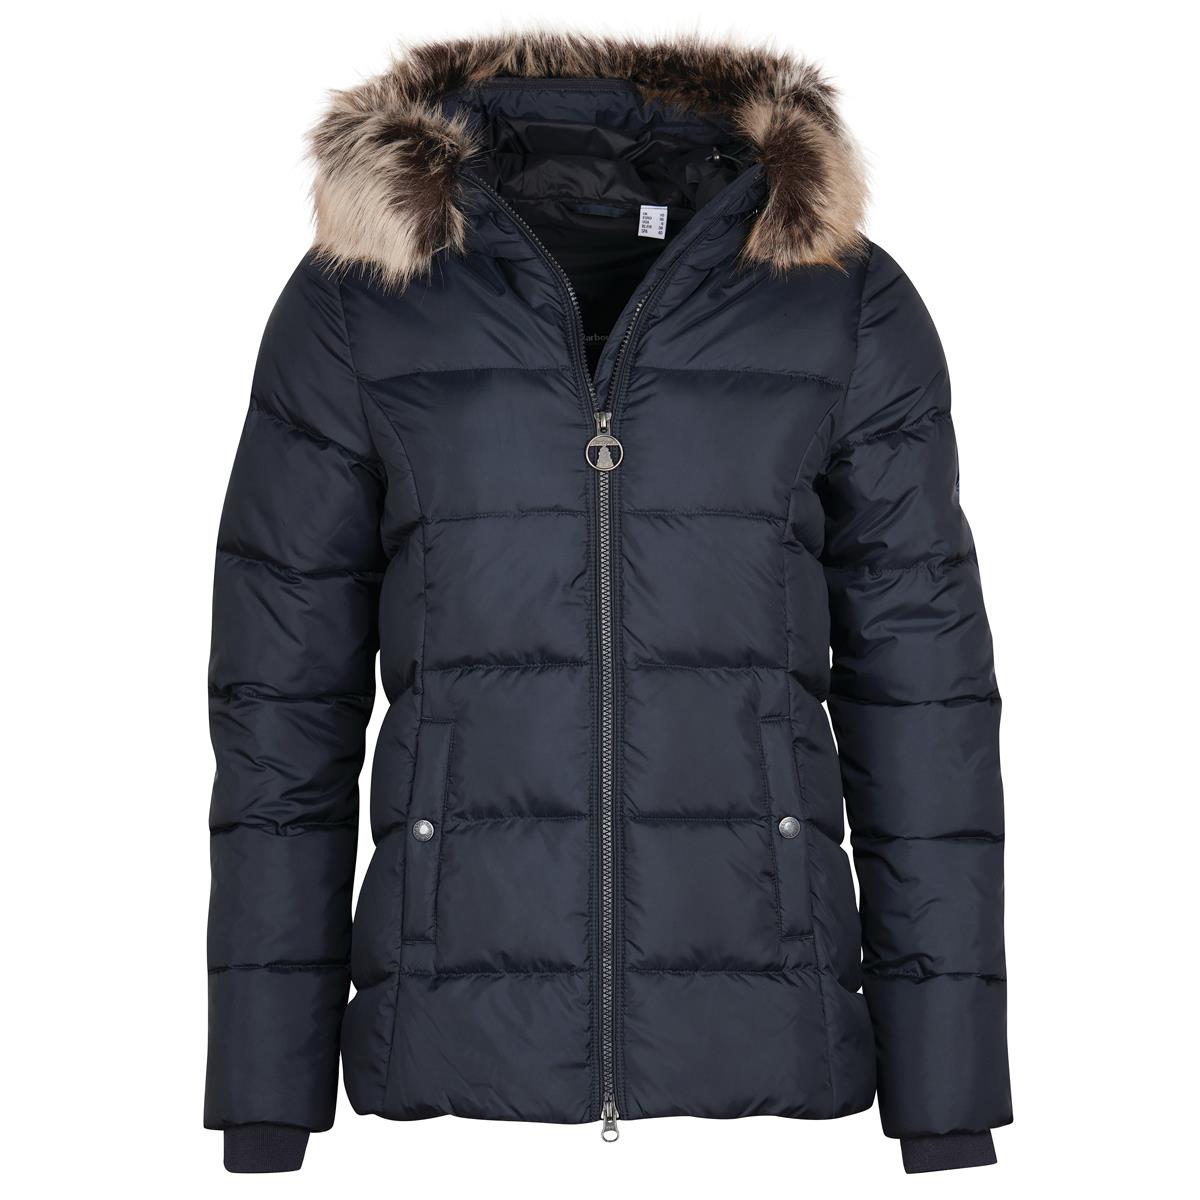 Barbour Womens Midhurst Quilted Jacket Questions & Answers